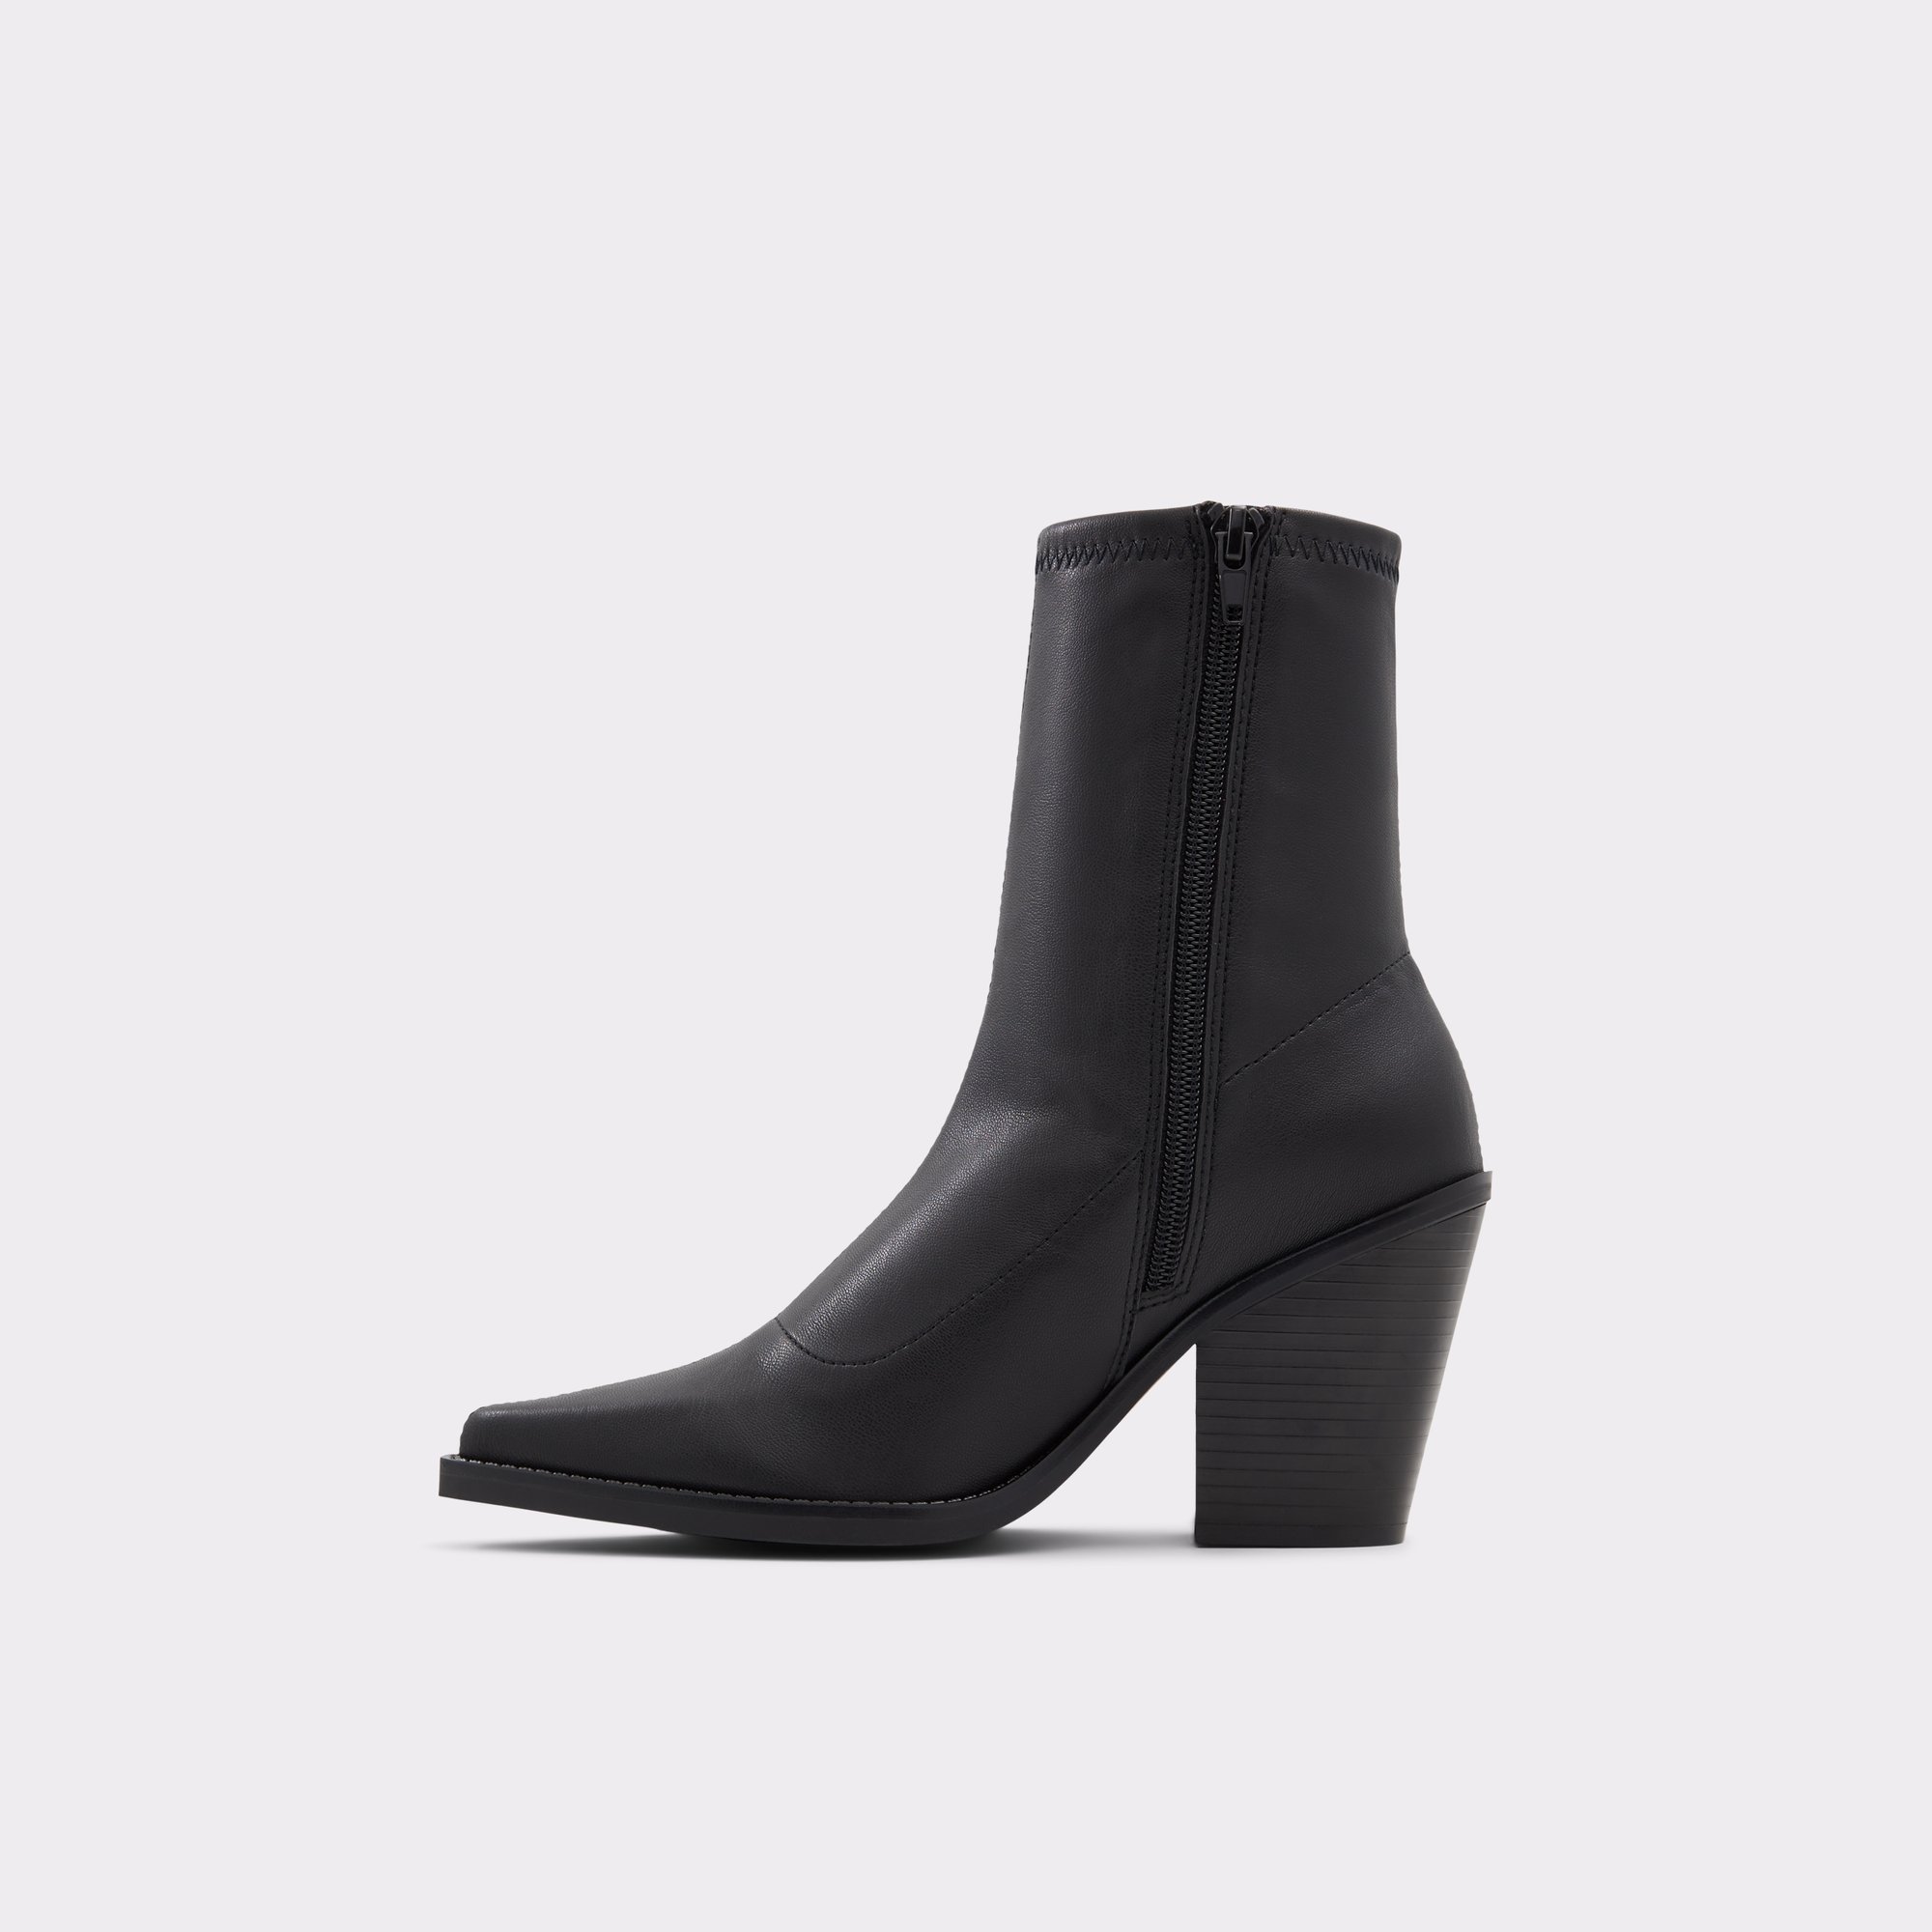 Bamboo Black Women's Ankle boots | ALDO Canada